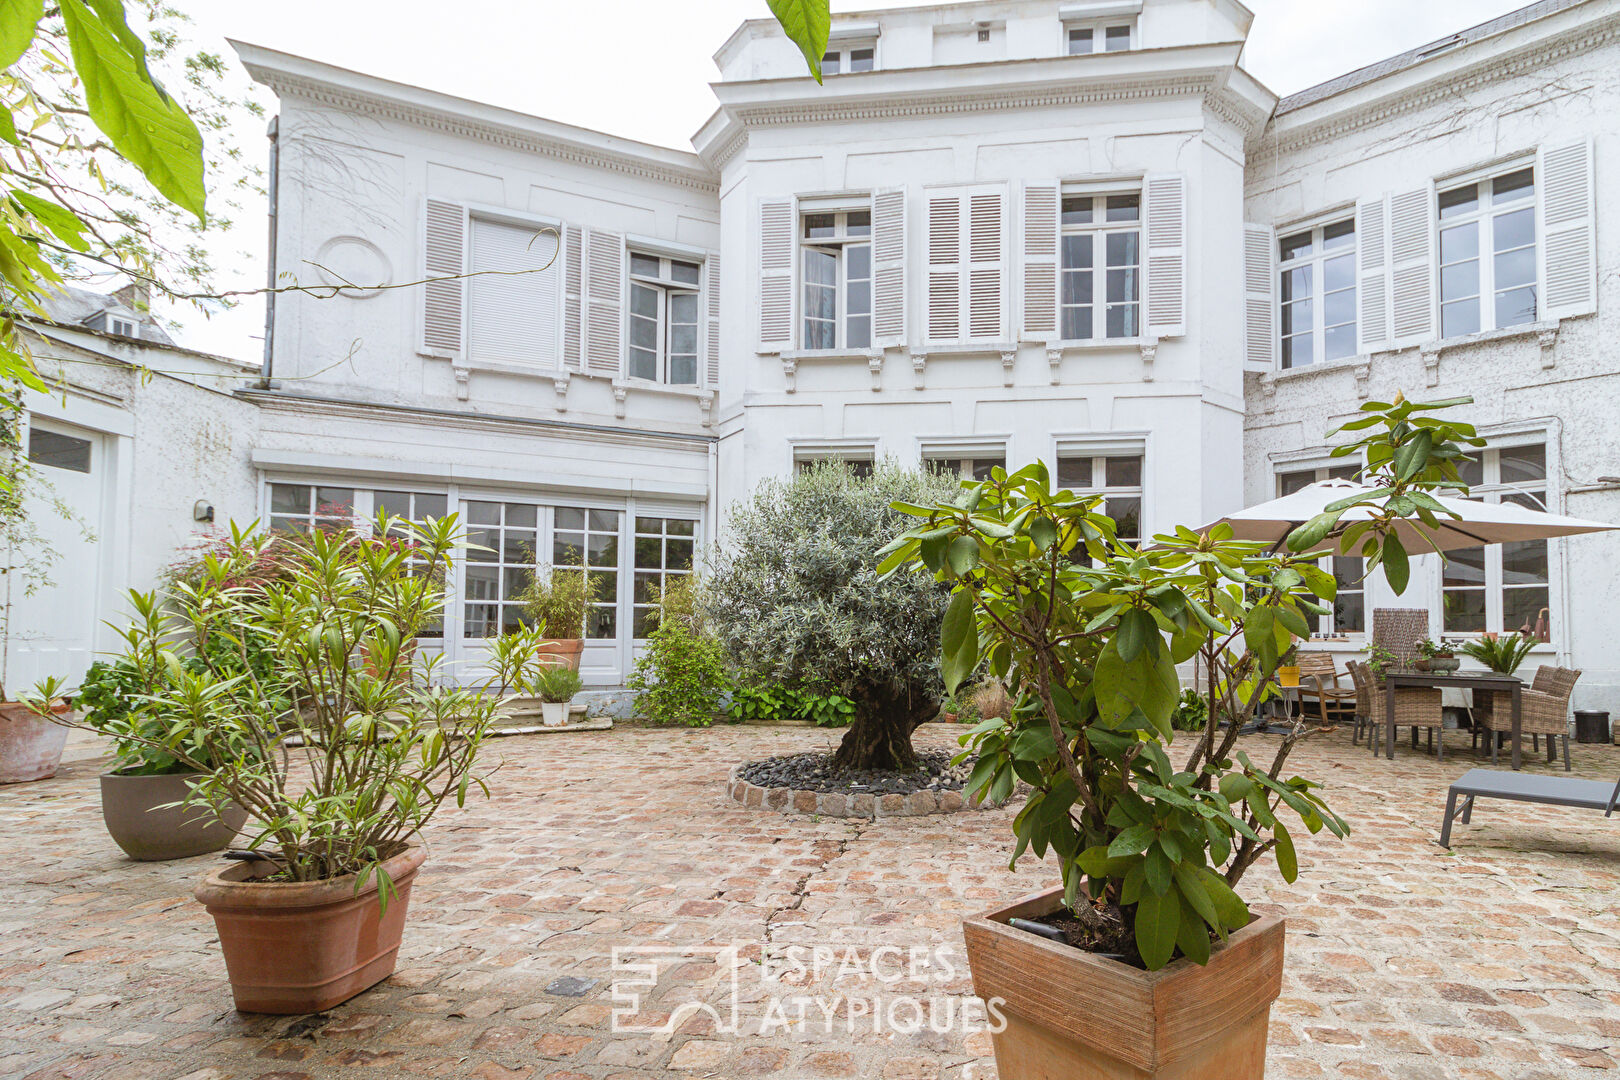 Magnificent residence with courtyard in the heart of Amiens city center